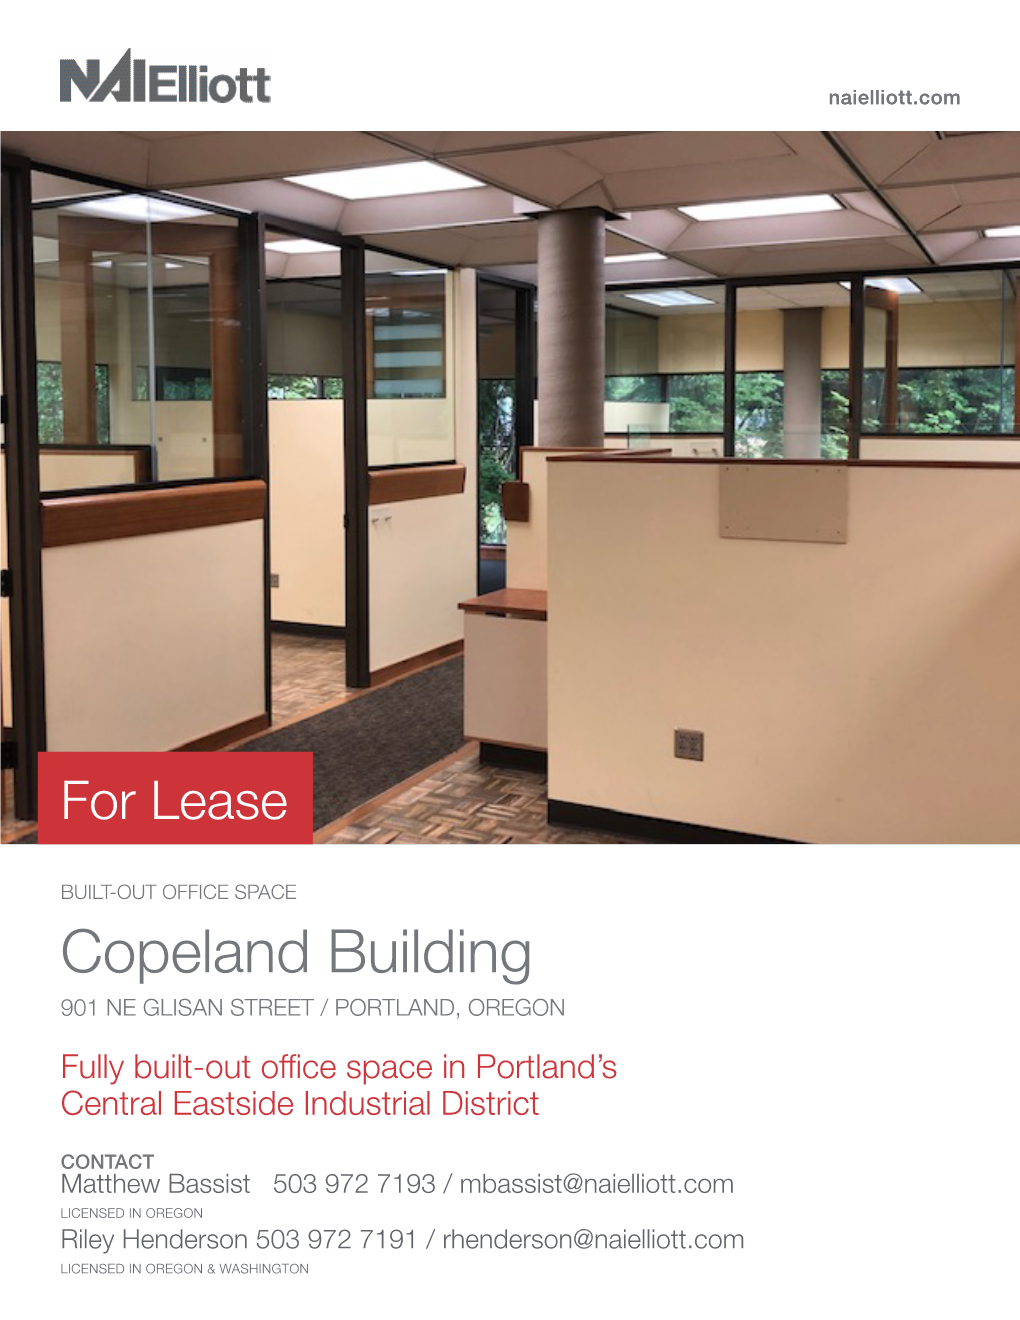 Copeland Building 901 NE GLISAN STREET / PORTLAND, OREGON Fully Built-Out Office Space in Portland’S Central Eastside Industrial District